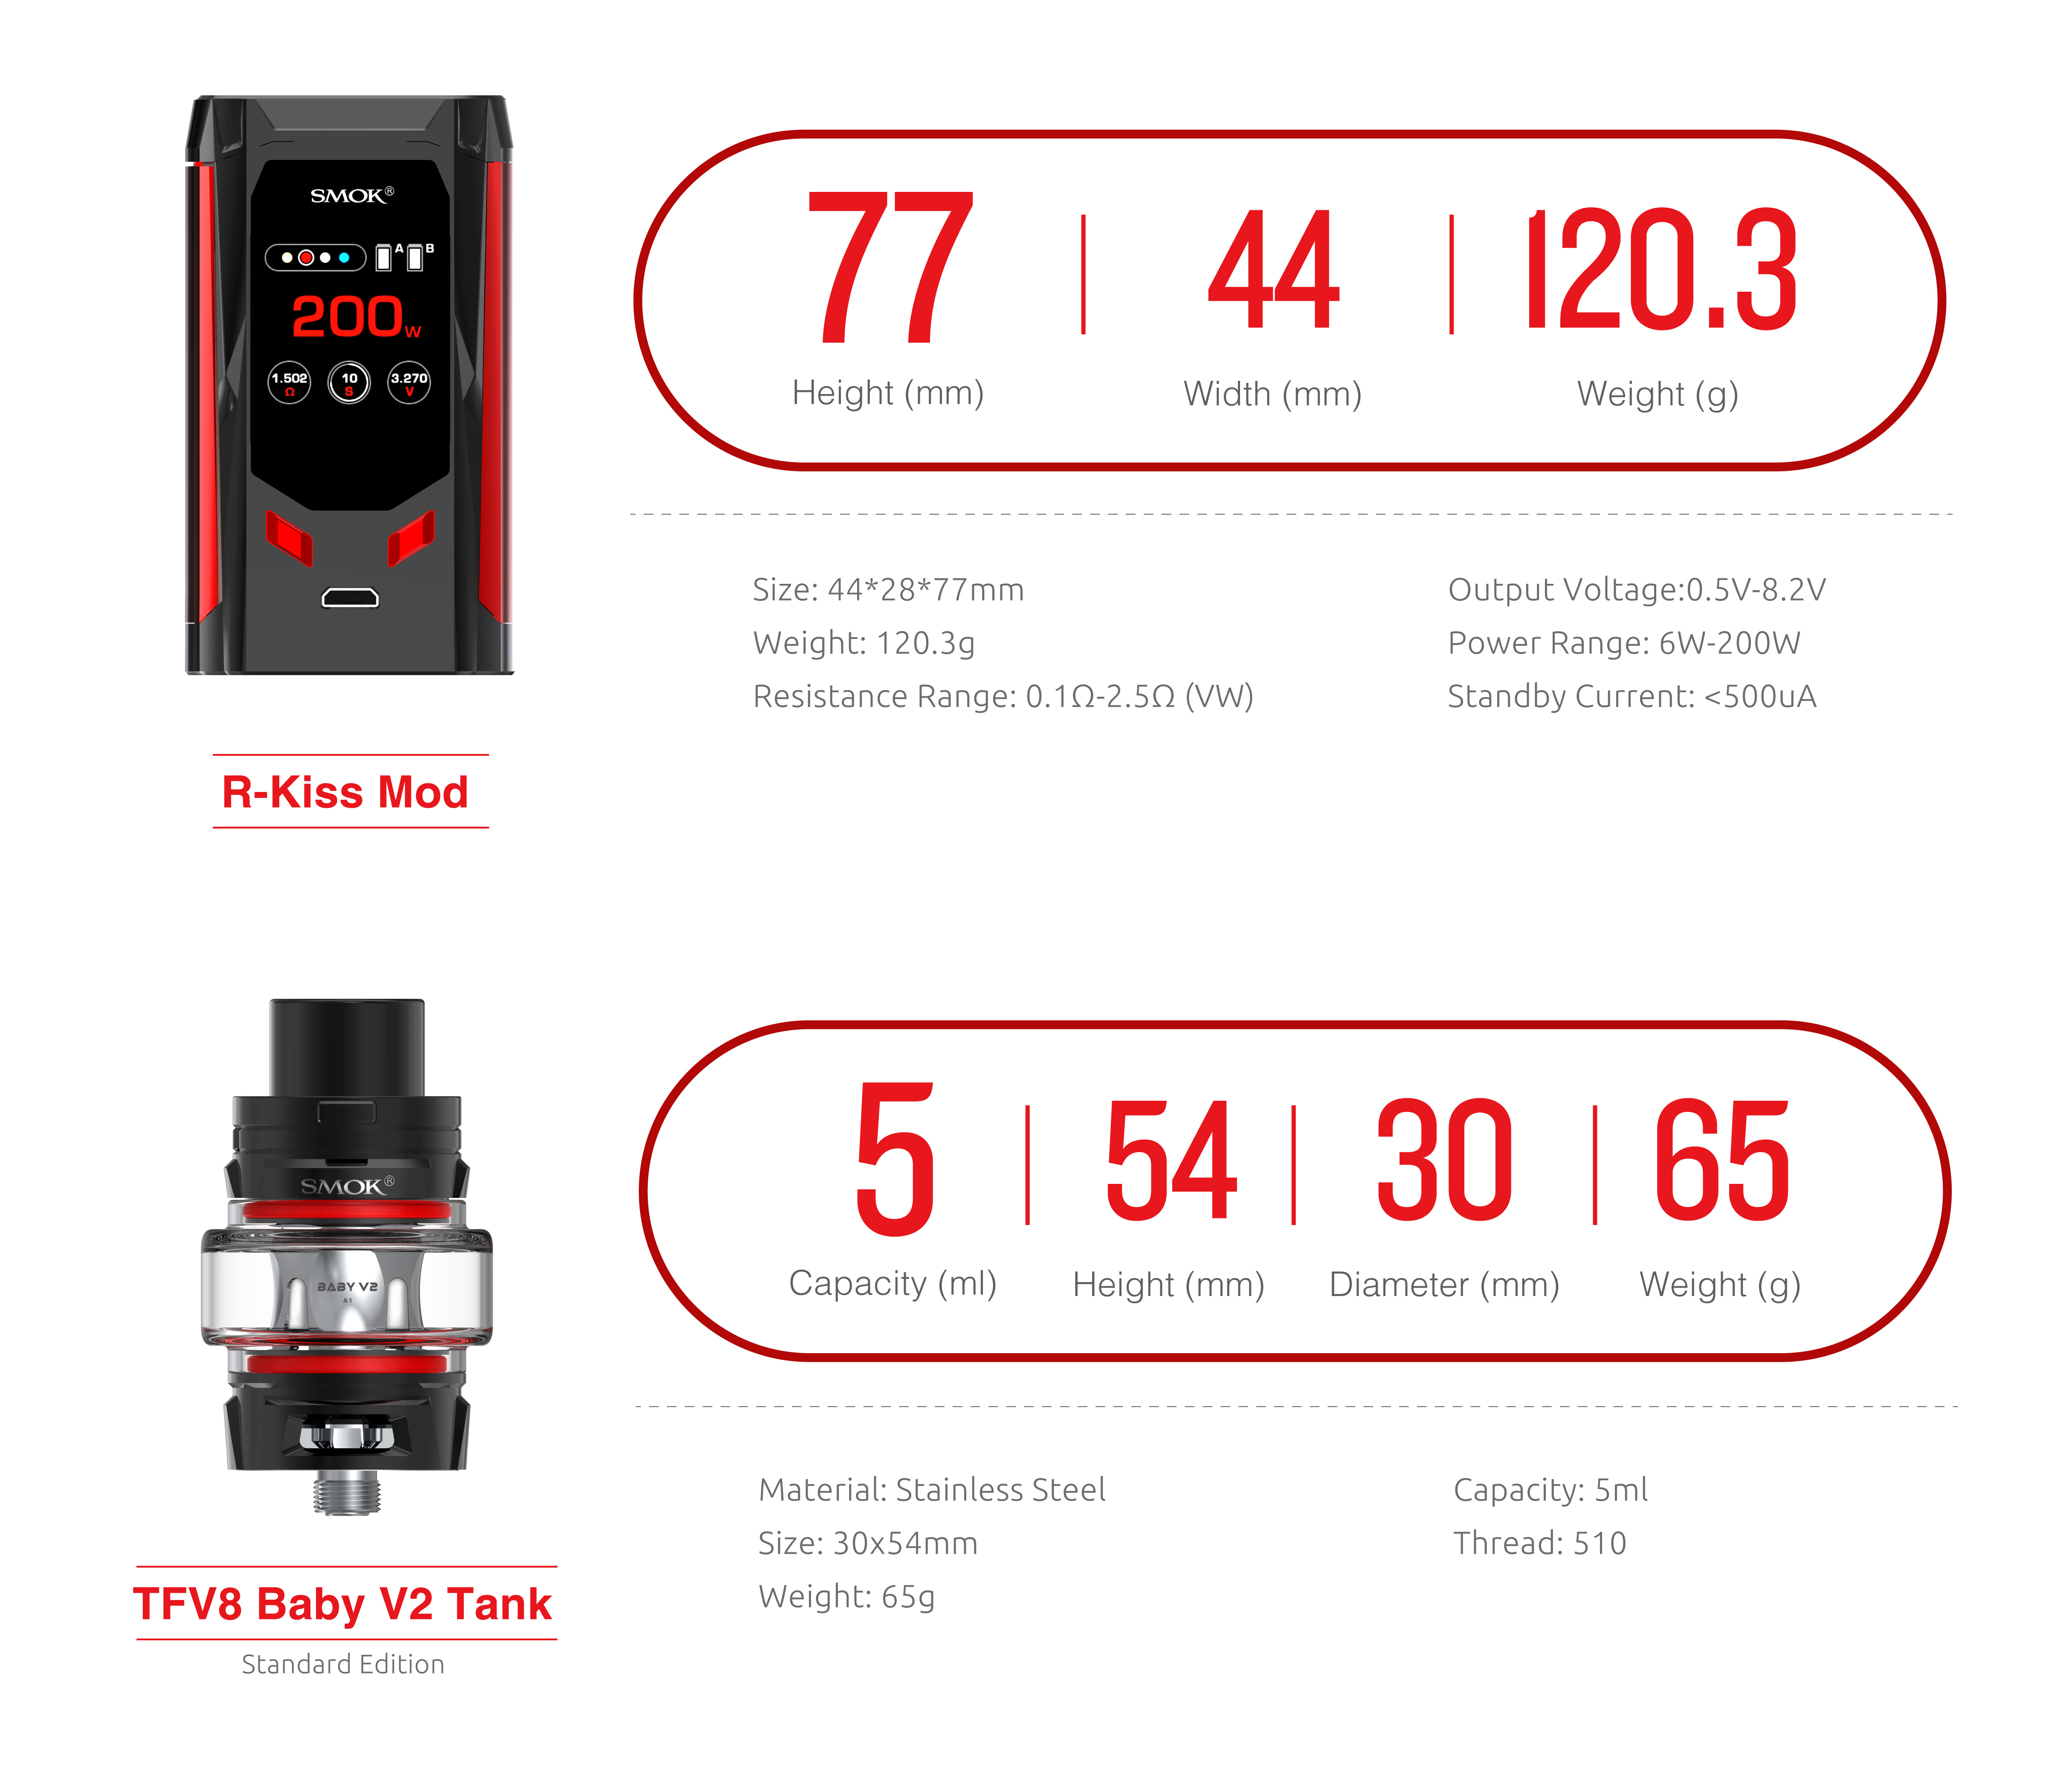 Specifications of SMOK R-Kiss